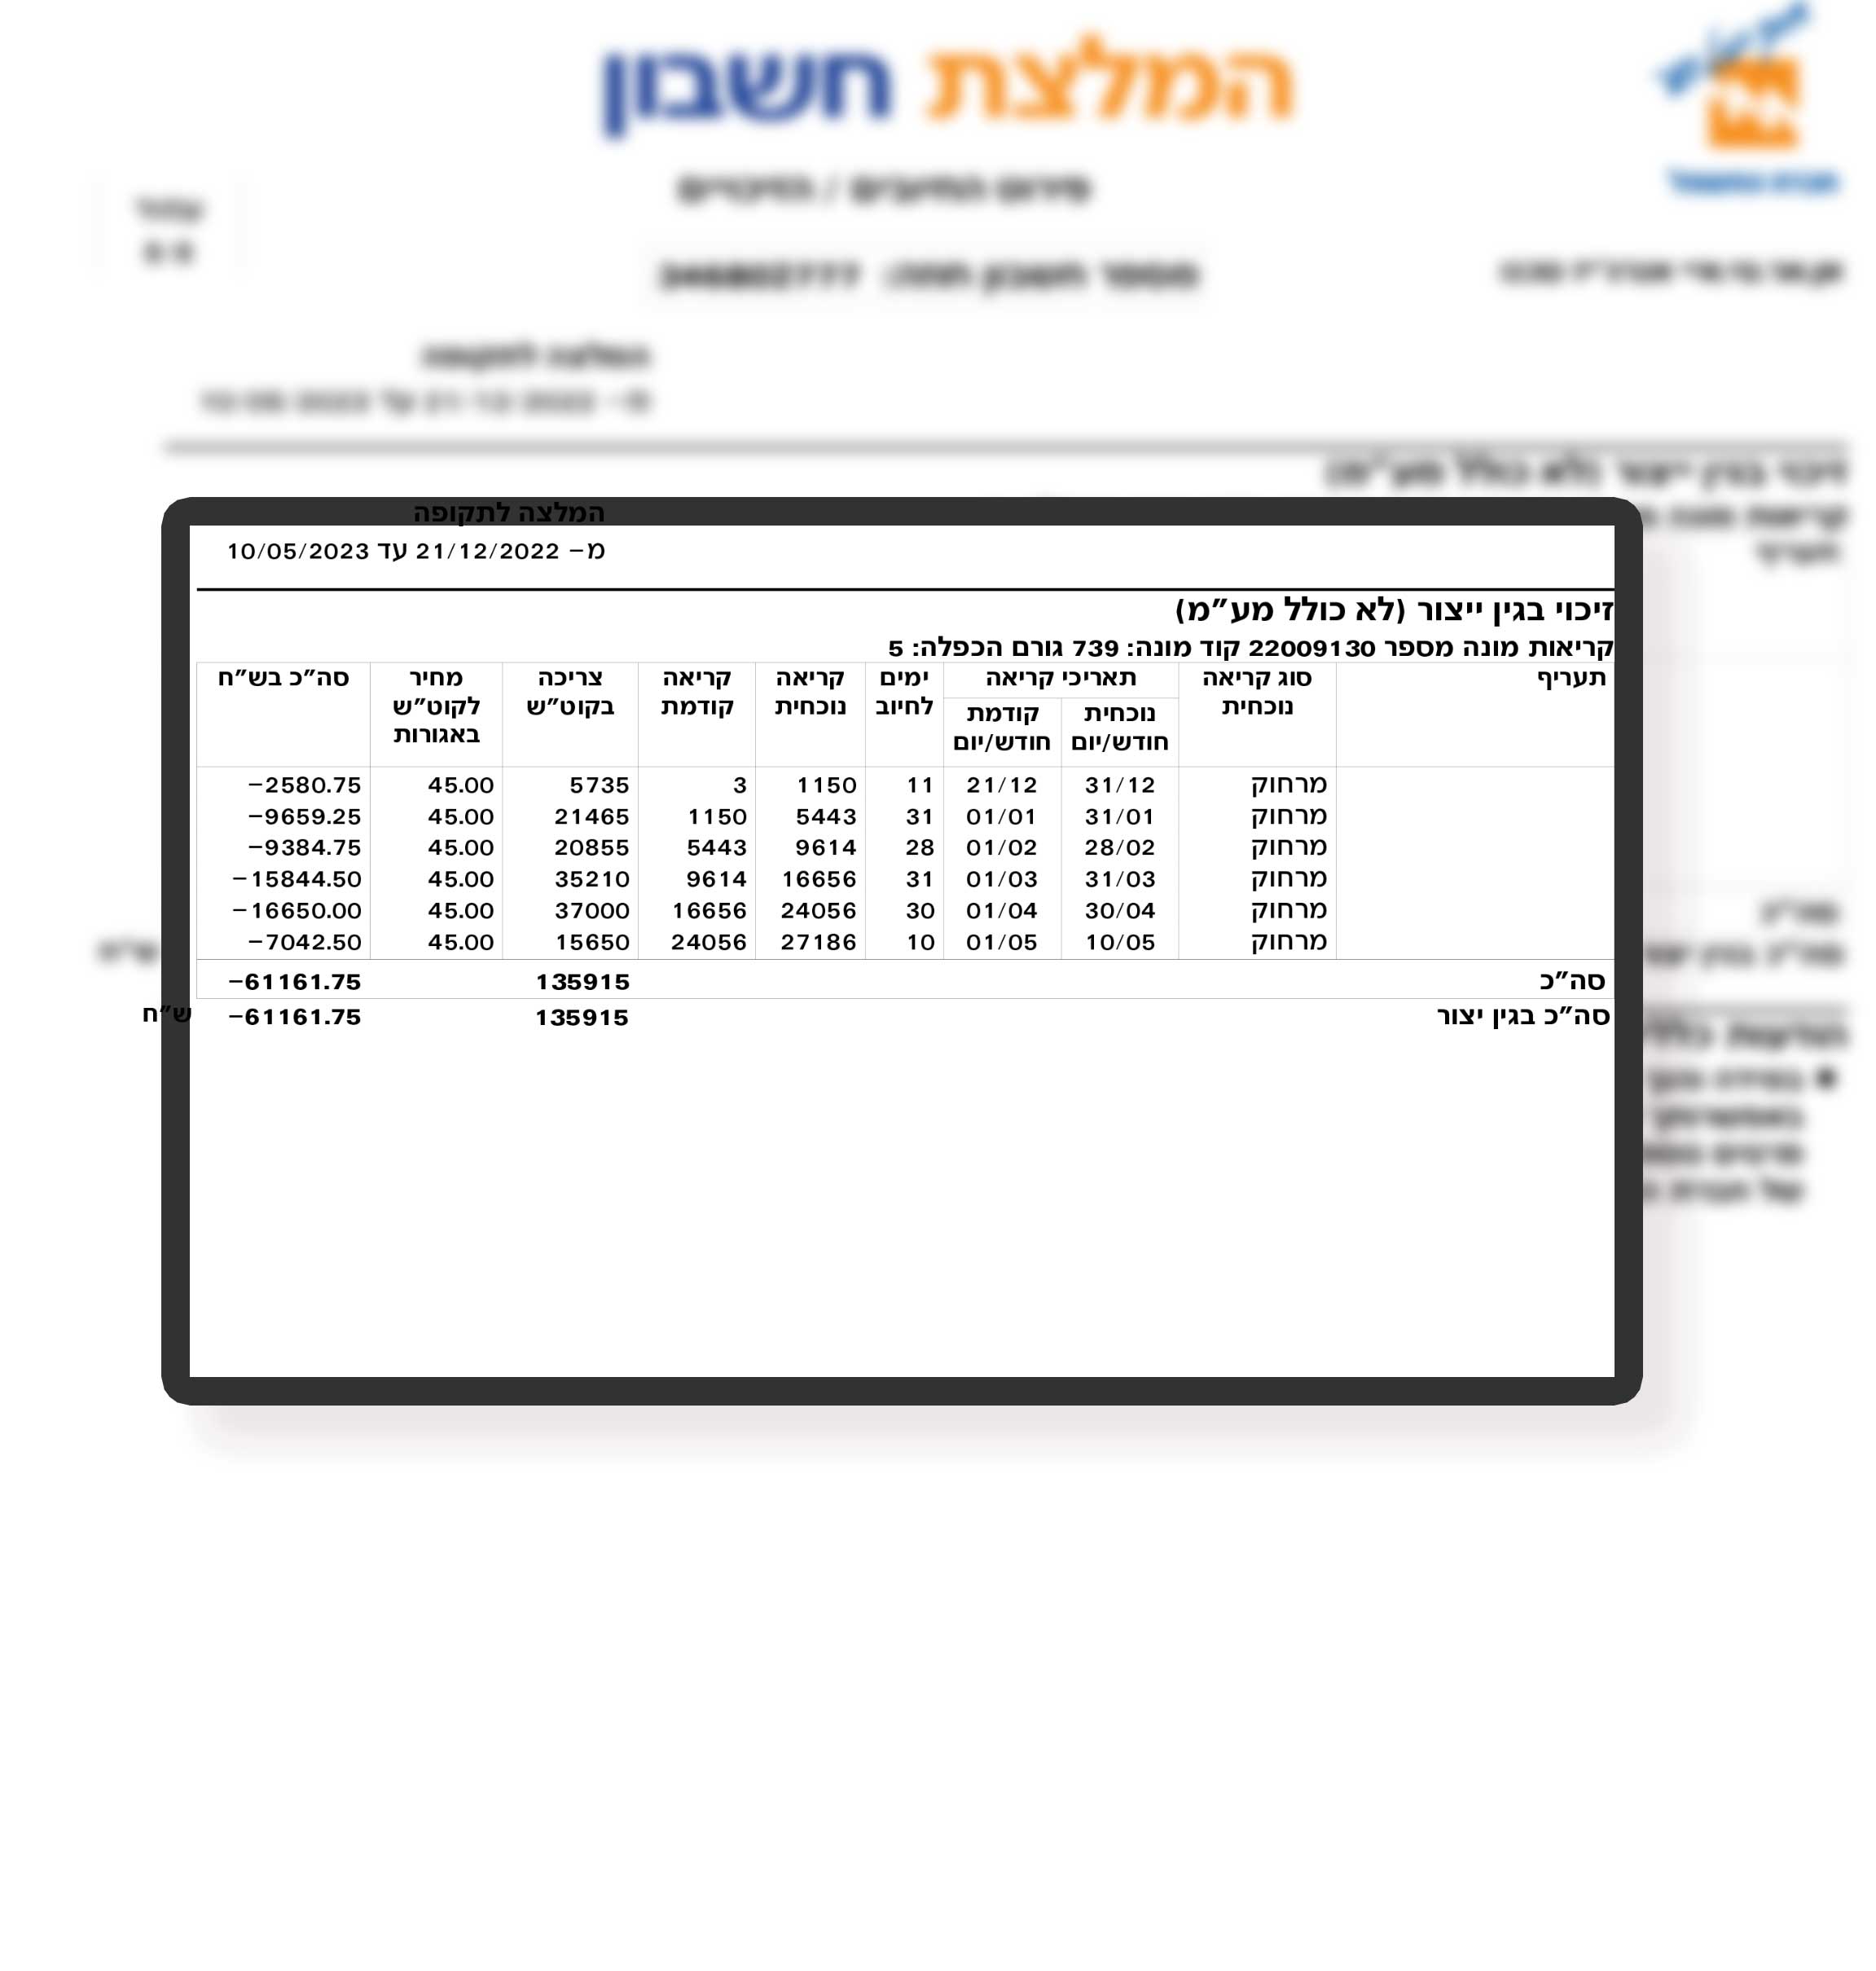 Rehavia from Hasharon district earned NIS 61,161 from the electricity company from 12/21/22 to 05/10/2023